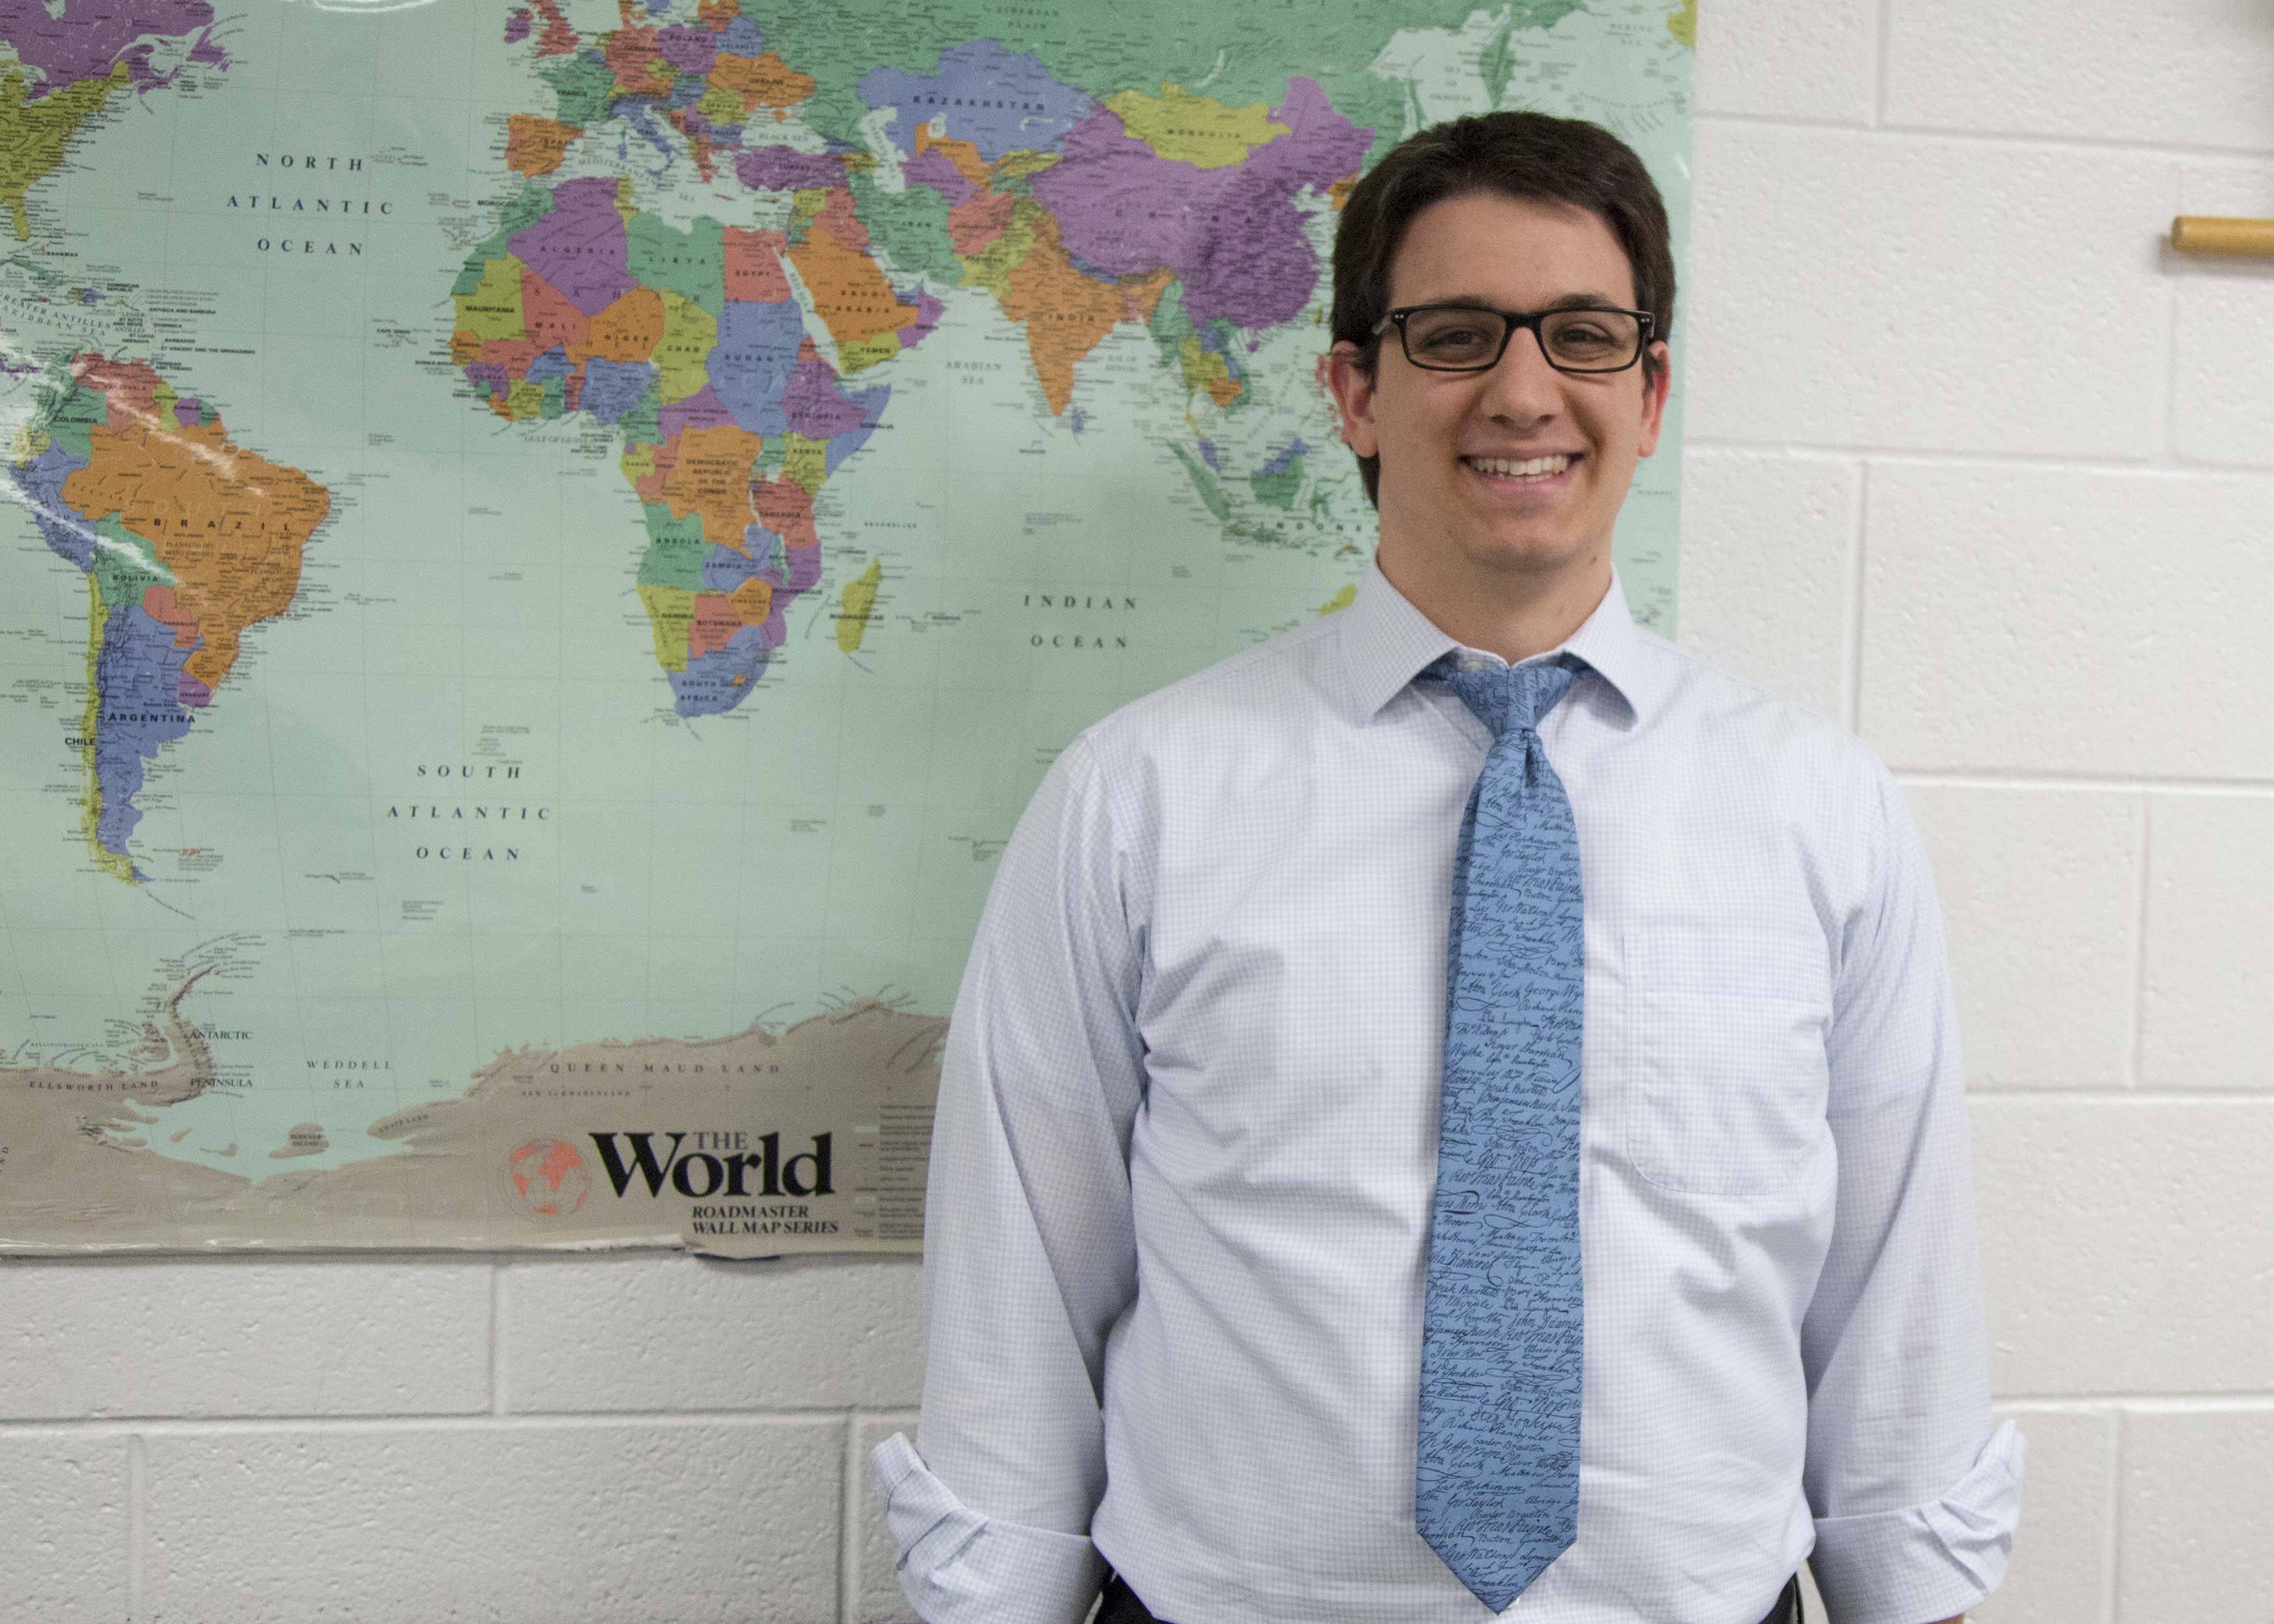 VBSchools on Twitter: "Meet Gregory Hogan, a seventh-grade teacher at Plaza Middle School, and finalist the 2019 Citywide Teacher of the Year. #WeAreVBSchools Read about Mr. Hogan here: